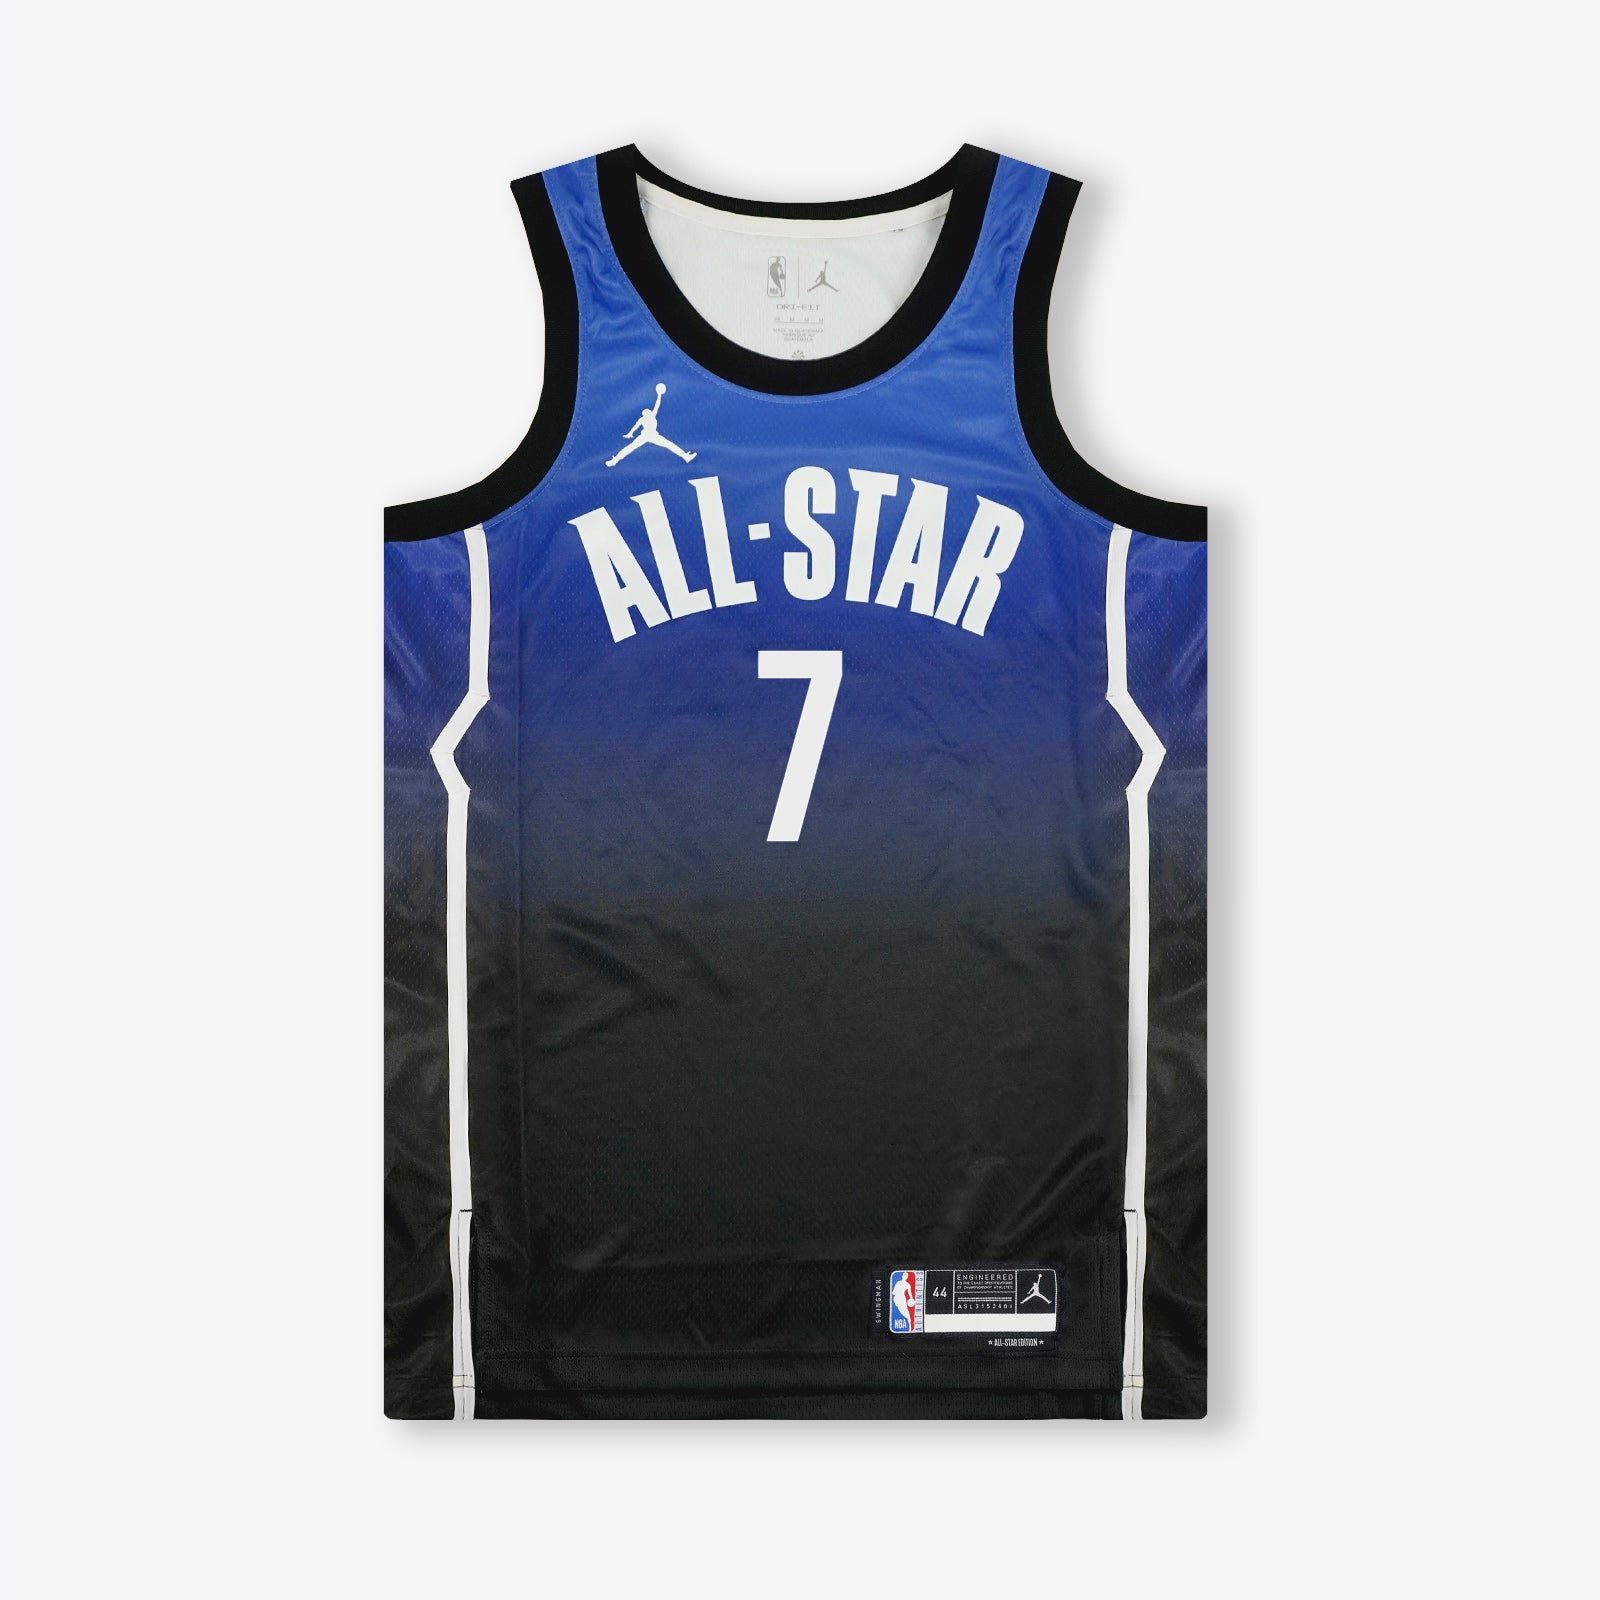 Nike NBA Kevin Durant Golden State Warriors All Star Game Swingman Jersey Black